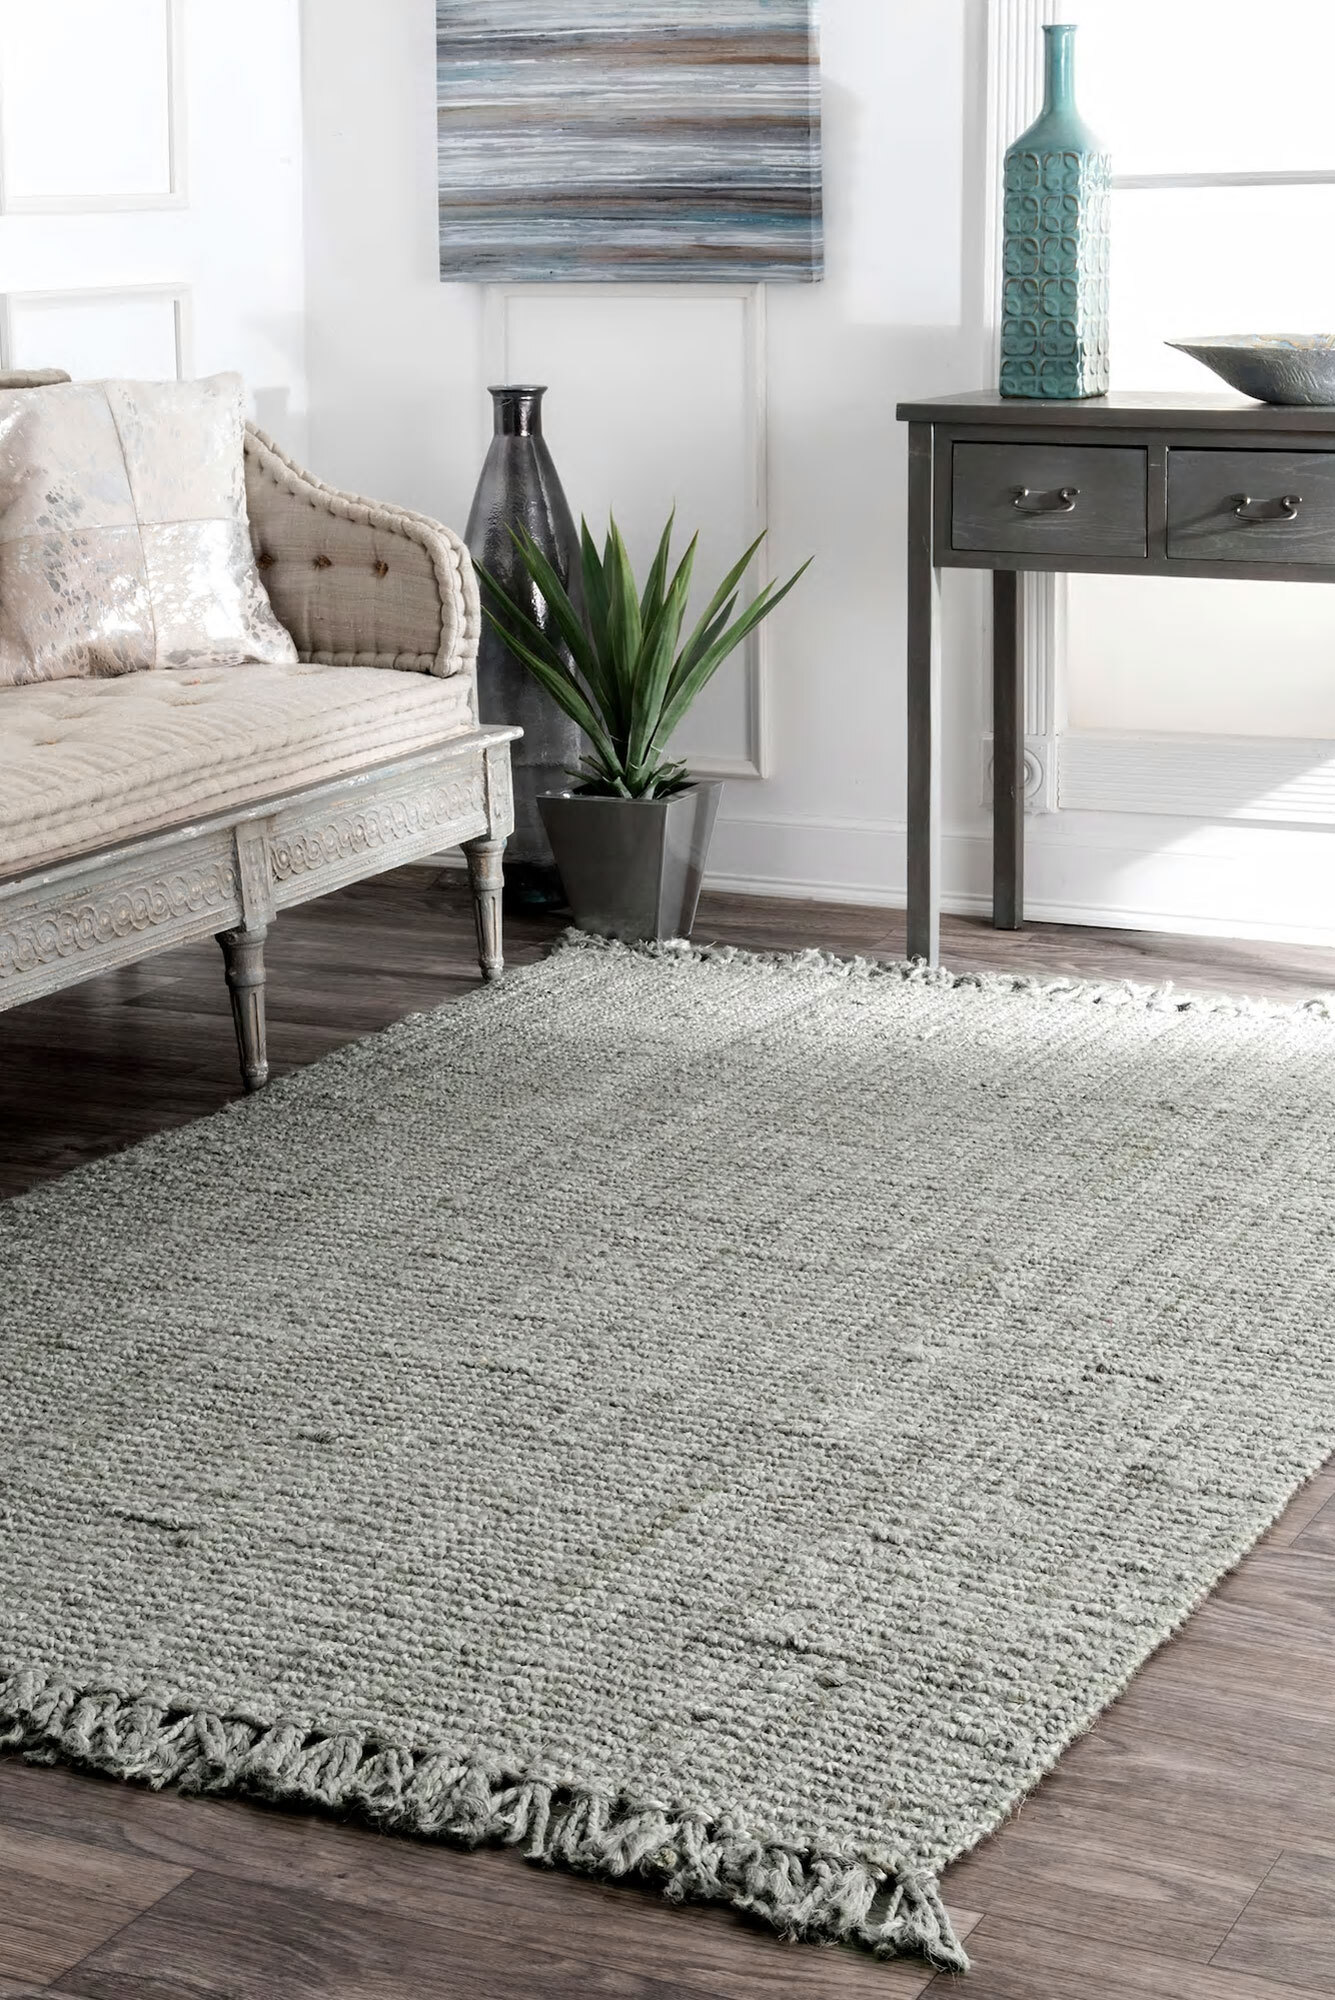 Dyed Jute Grey Hand Woven Rug(Size 149 x 80cm)